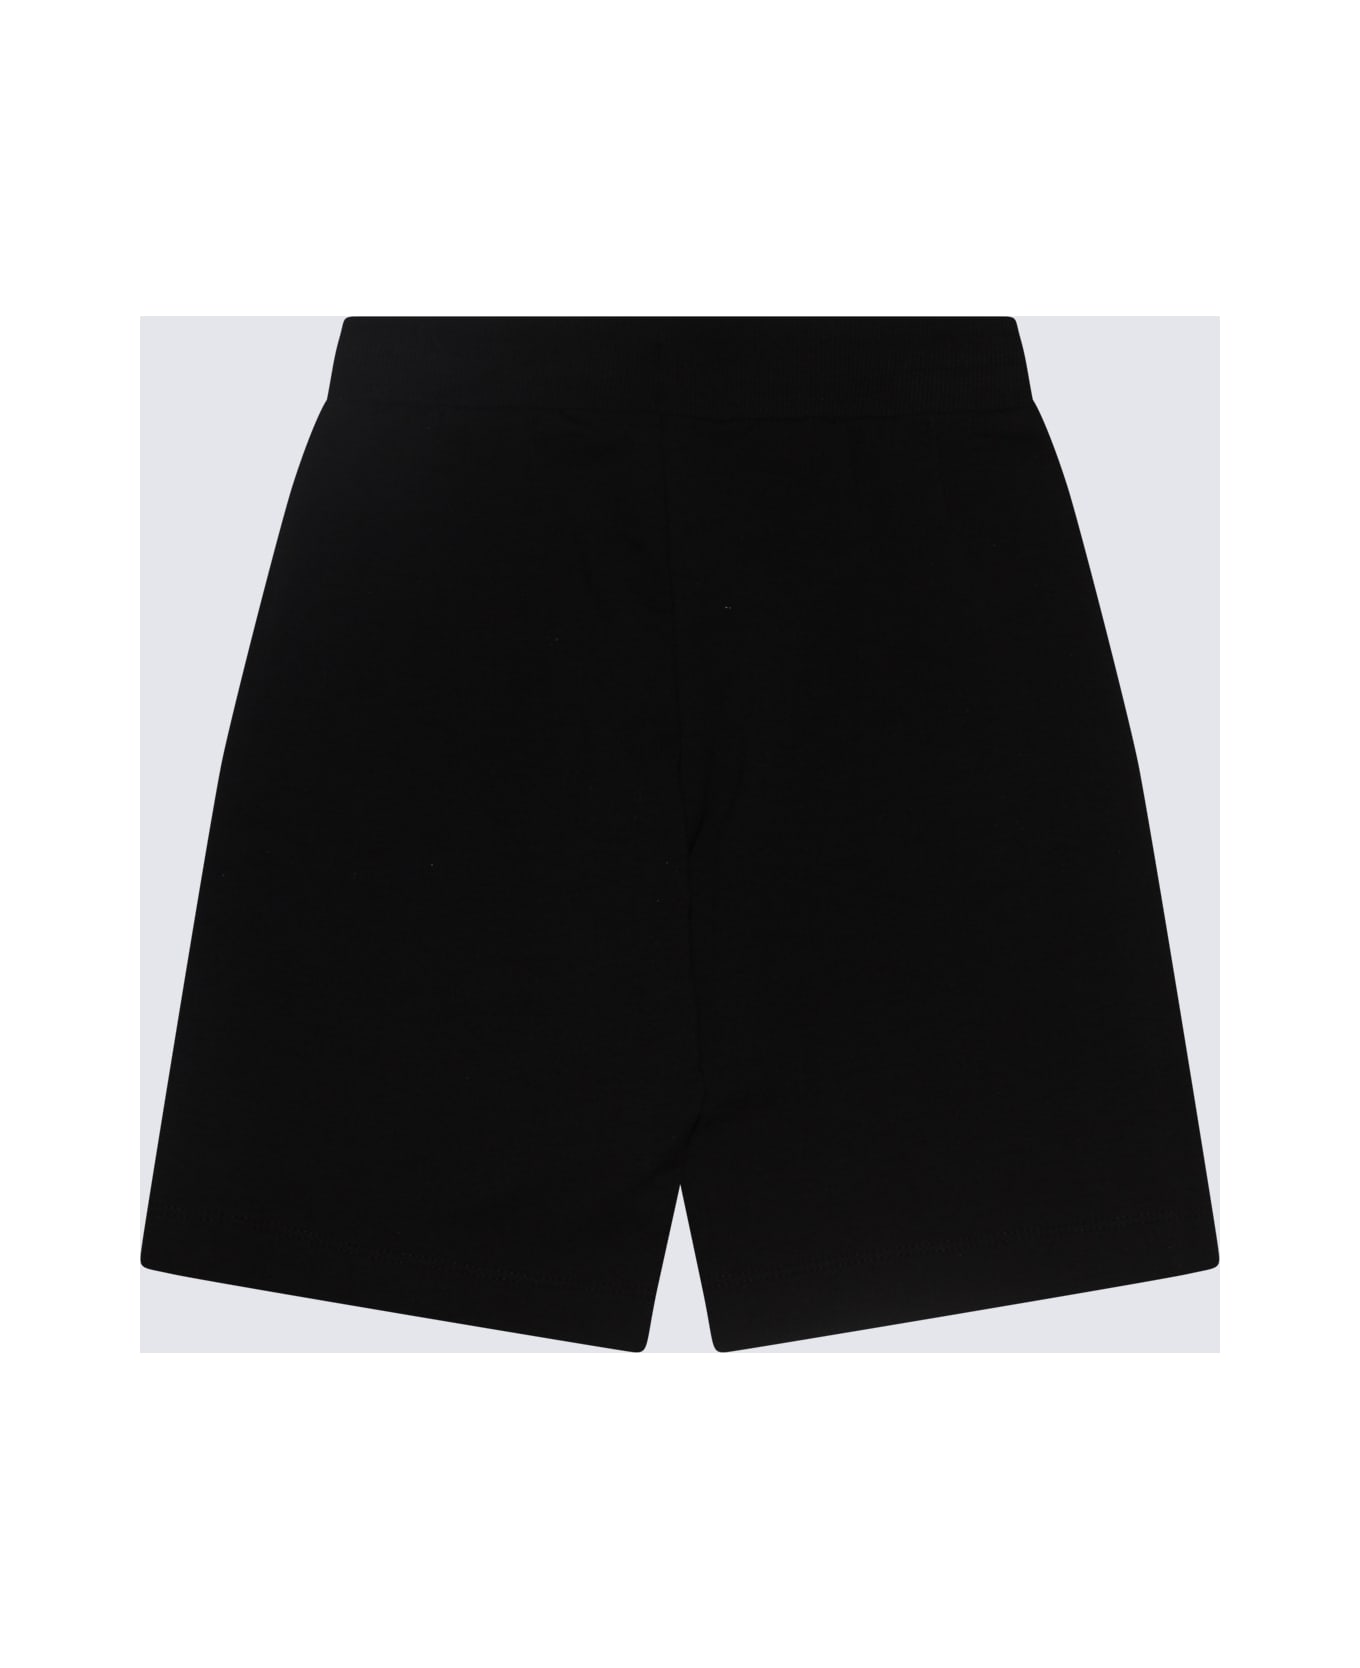 Moschino Black And White Cotton Blend Track Shorts - Black ボトムス